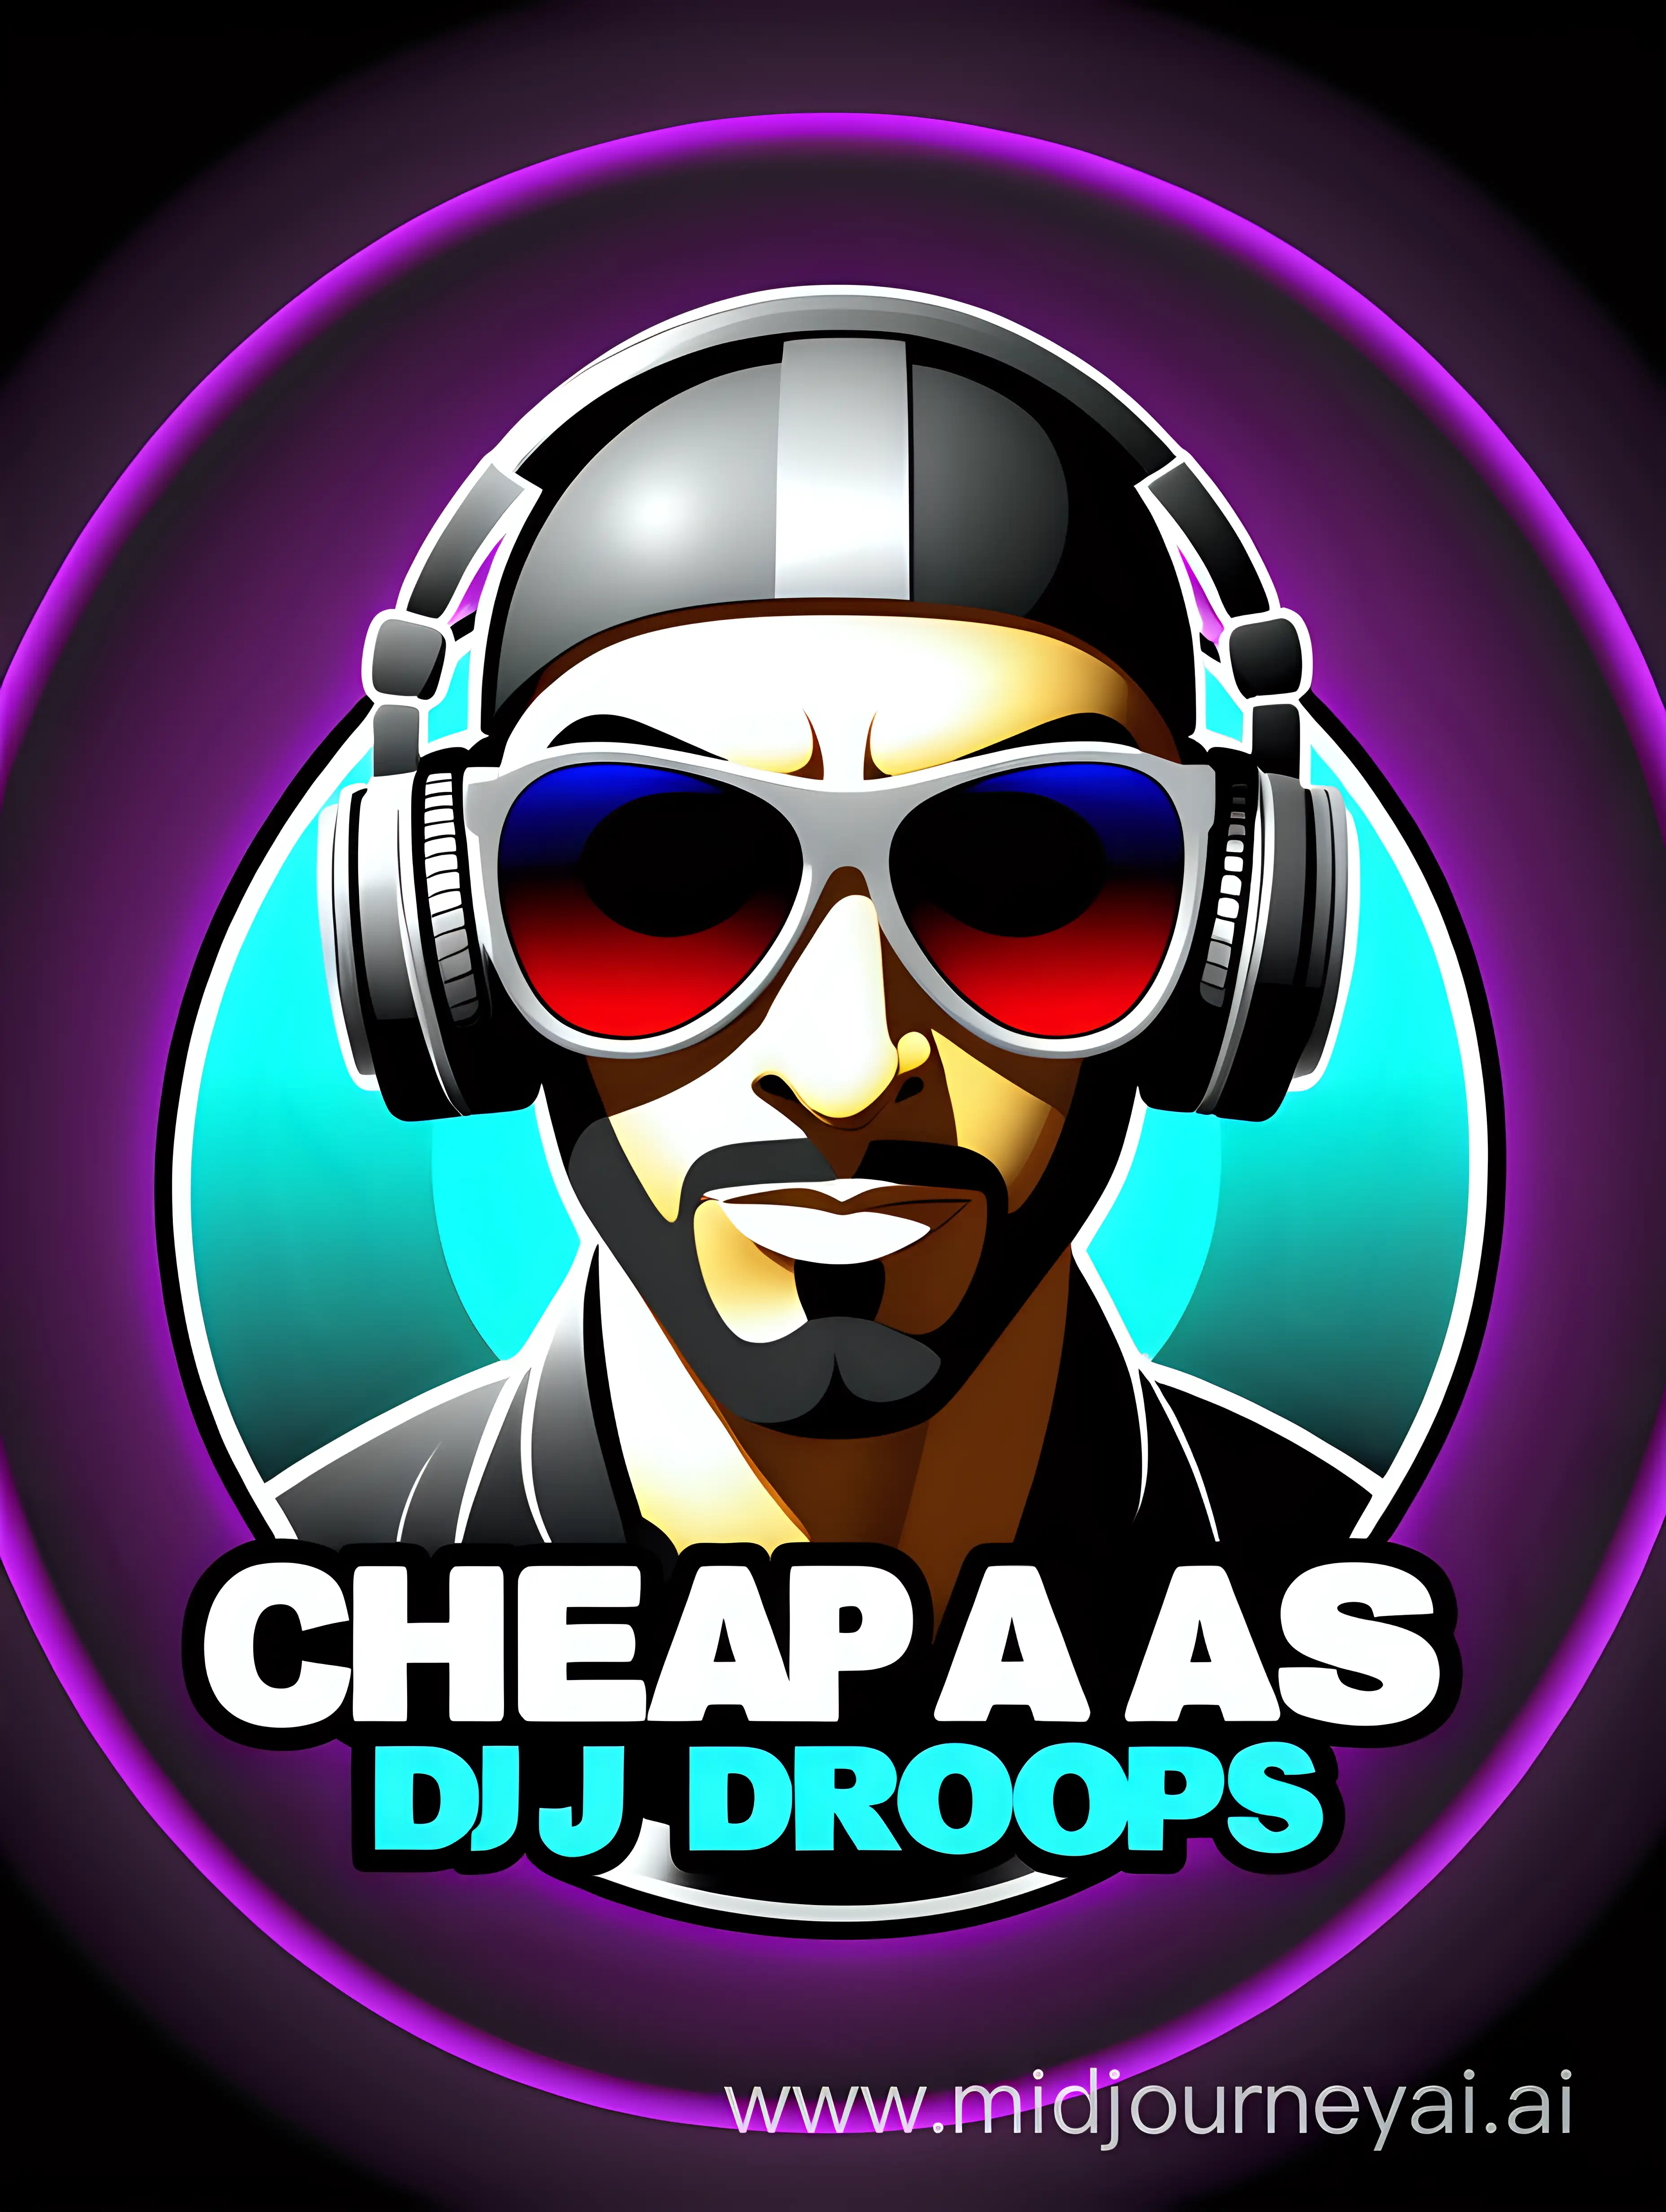 A logo for "Cheap Ass Dj Drops".  Make sure you spell the name correctly.  This is for Disc Jockeys.